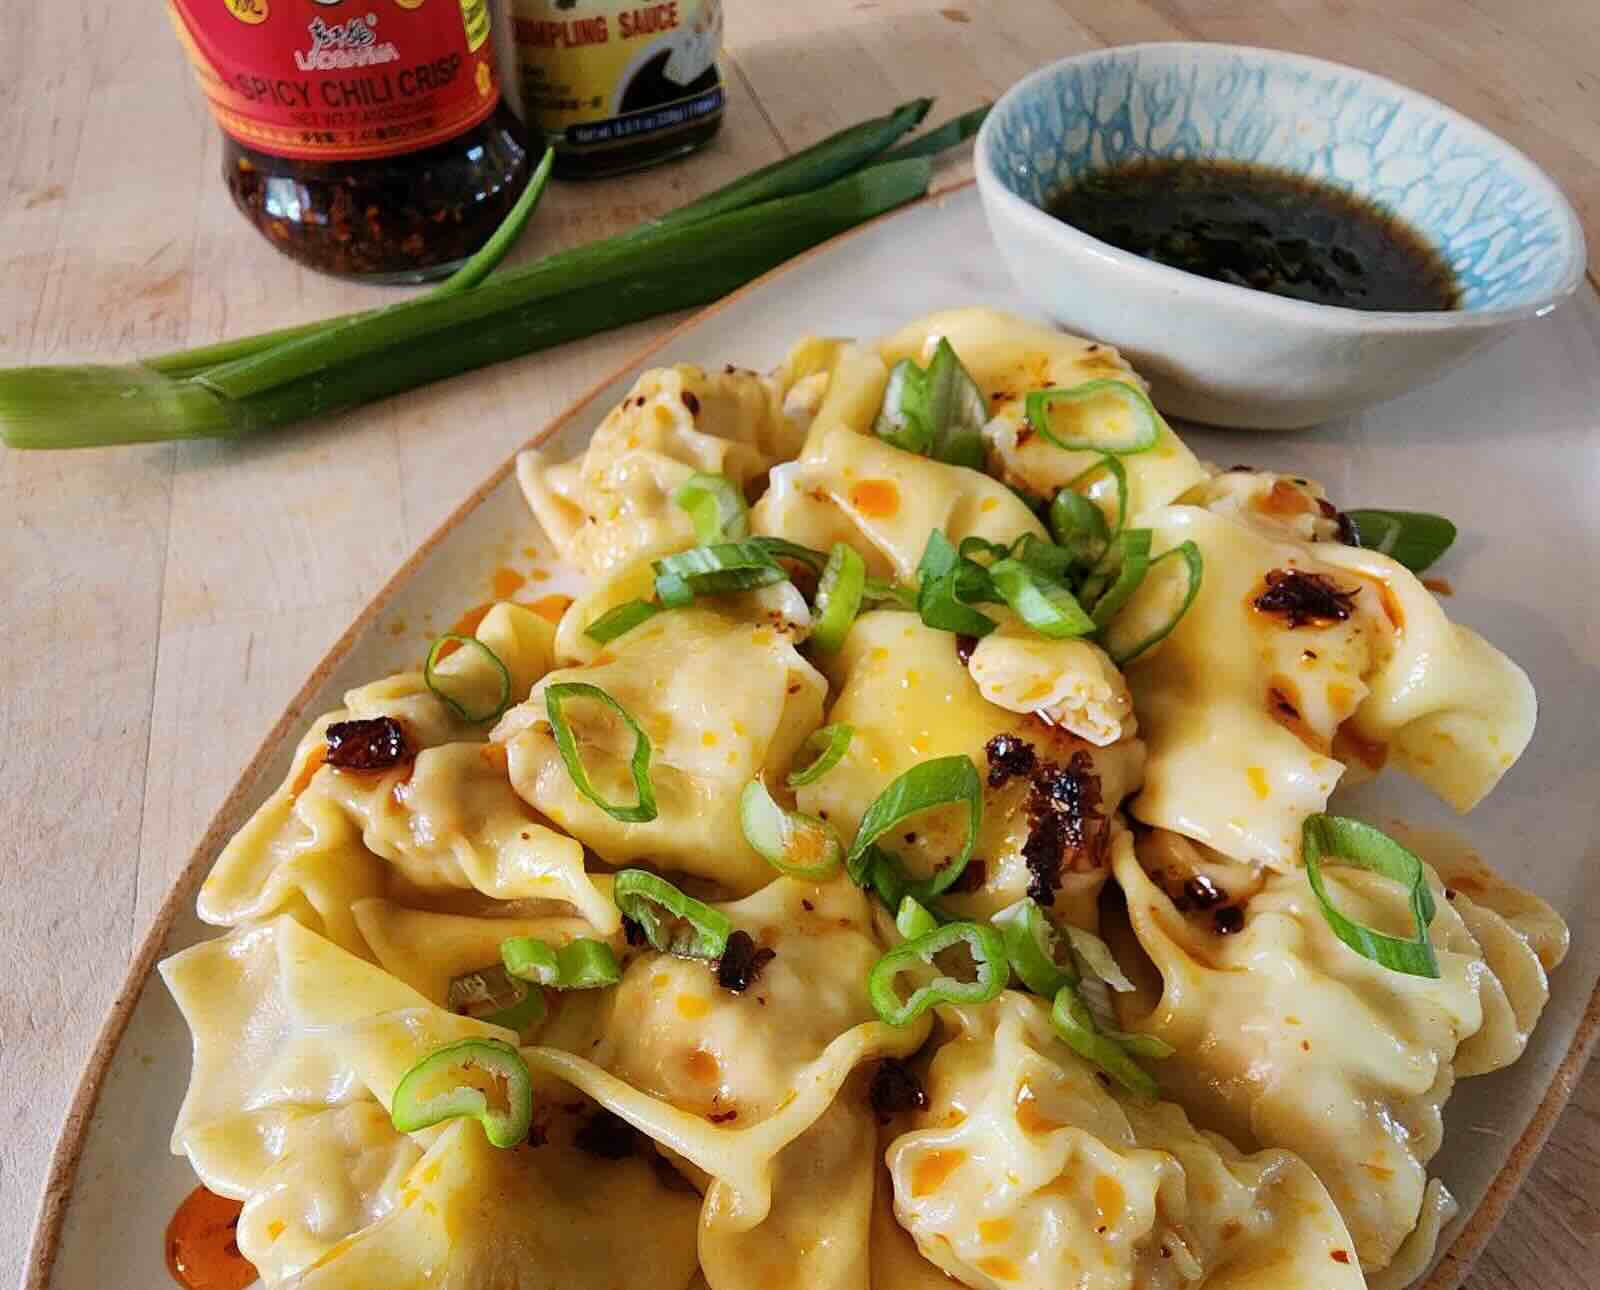 Quail-filled wonton dumplings topped with chili crisp and green onions on a white plate with soy sauce